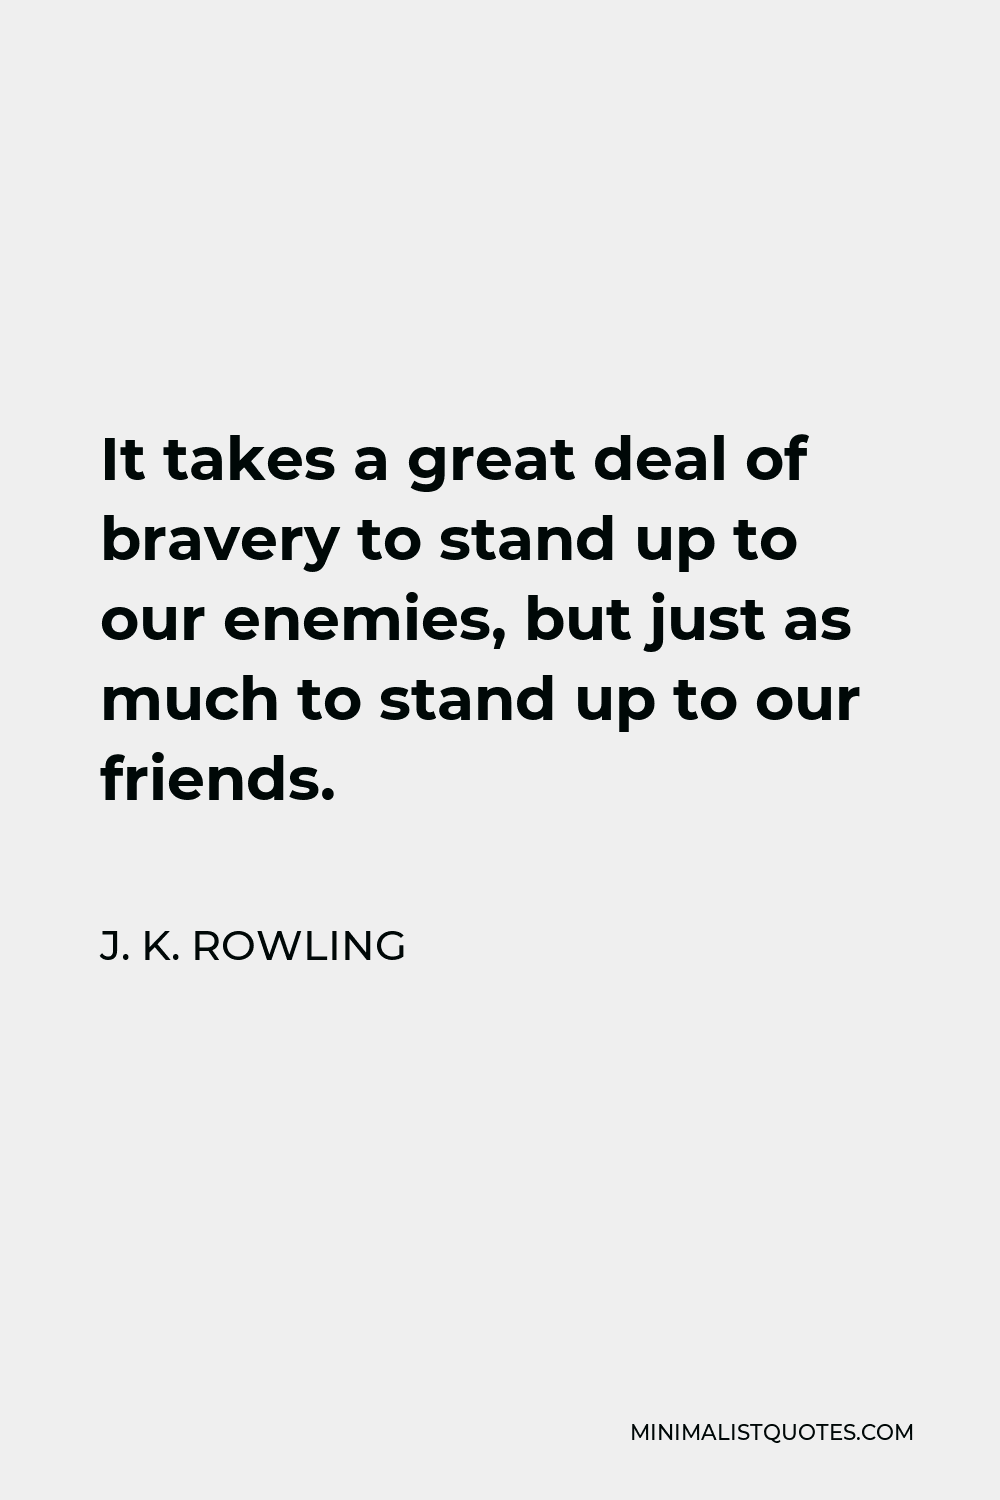 J. K. Rowling Quote - It takes a great deal of bravery to stand up to our enemies, but just as much to stand up to our friends.